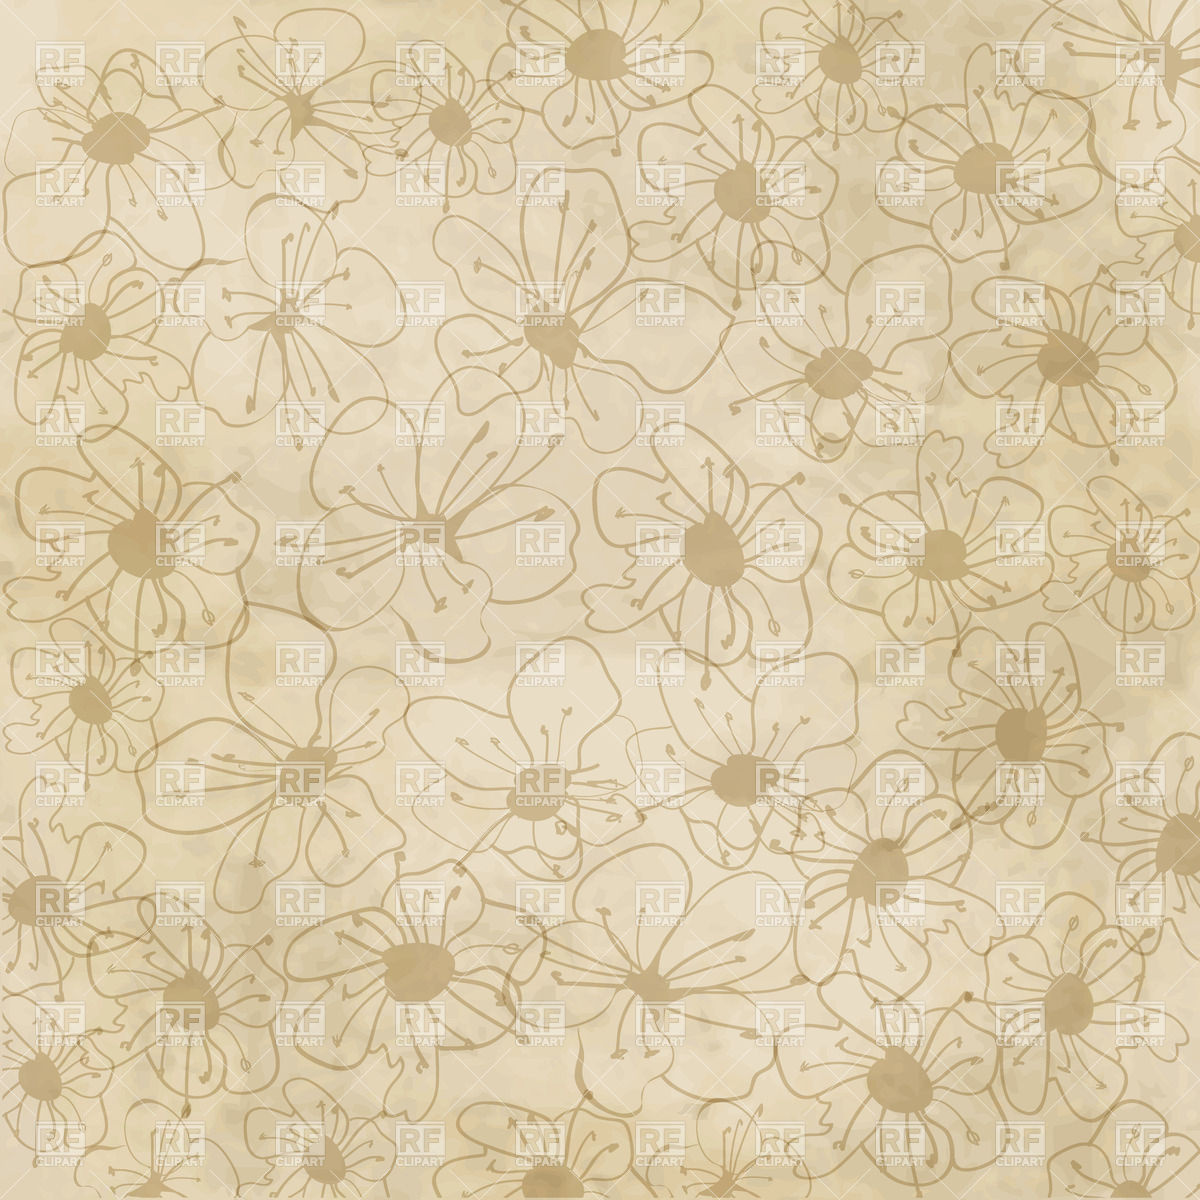 Floral Pattern On Old Paper Background 22621 Backgrounds Textures